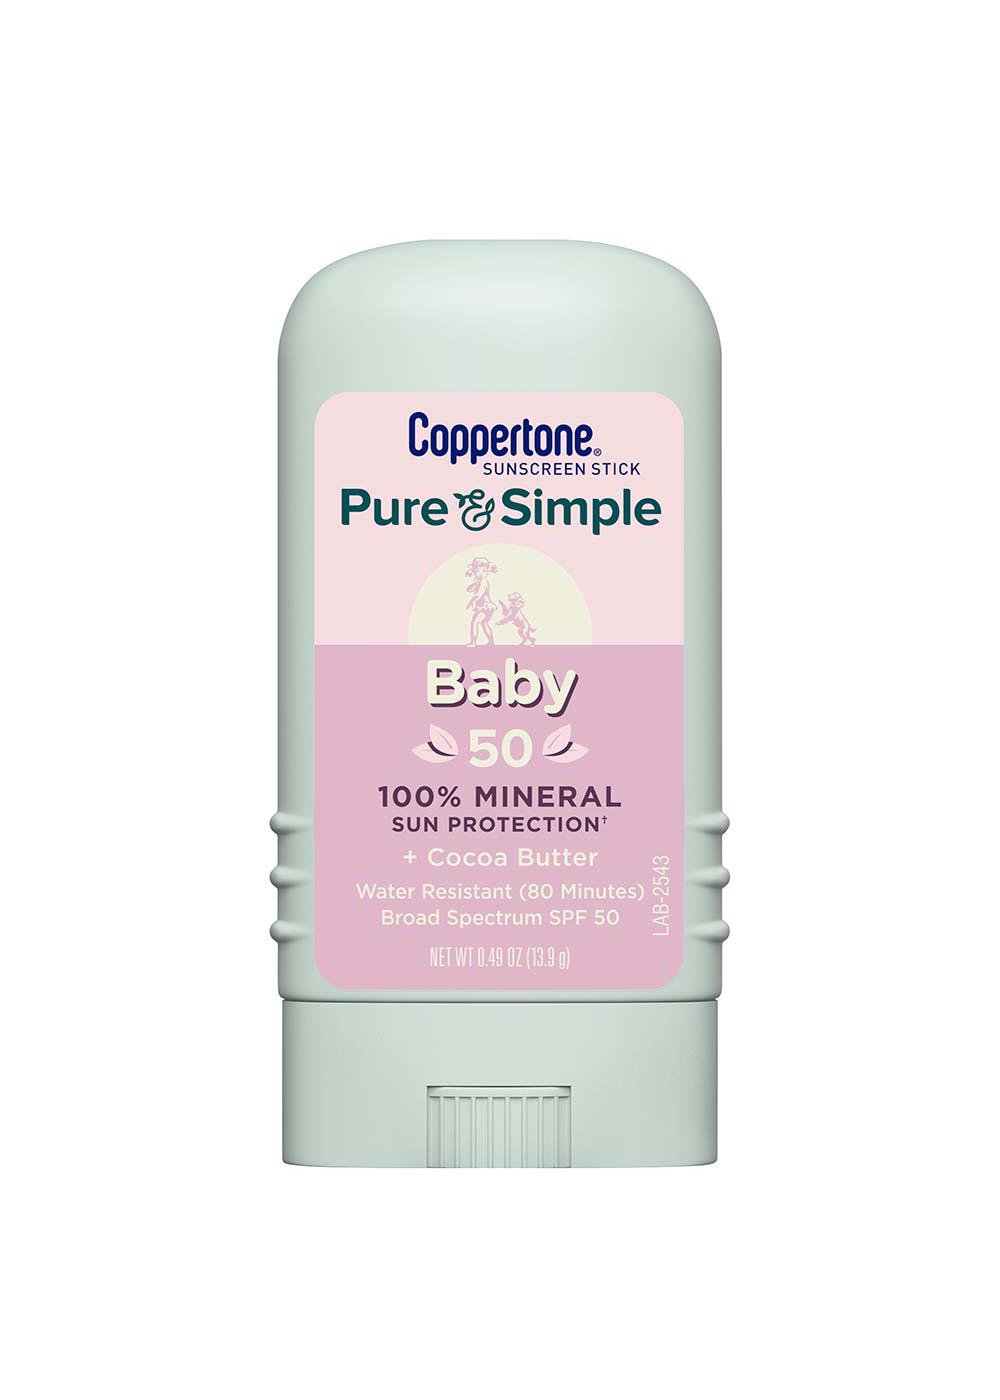 Coppertone Pure & Simple Baby Sunscreen Stick - SPF 50; image 2 of 2